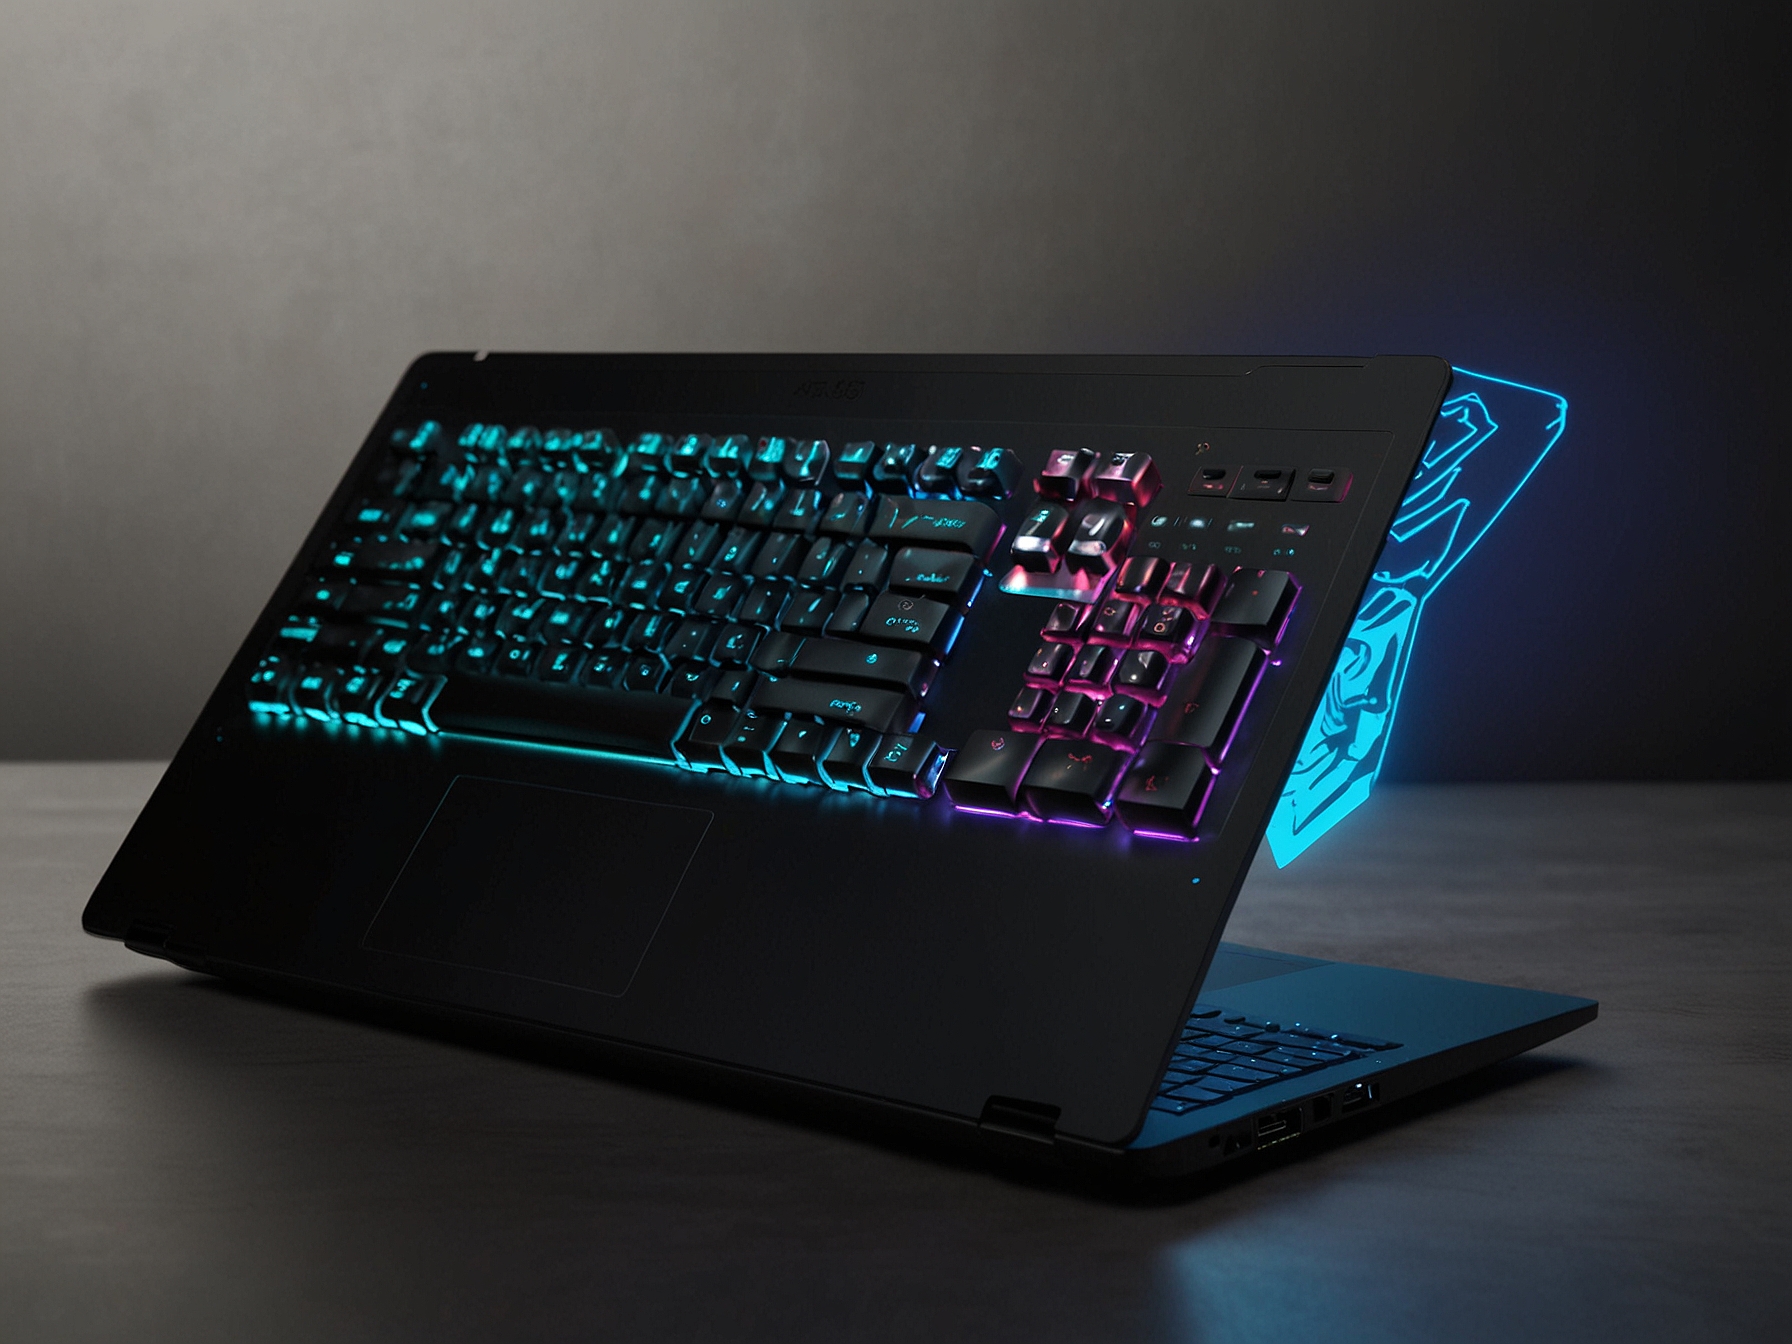 A modern, lightweight gaming laptop with an RGB keyboard, emphasizing portability and style for gamers who need powerful performance on the go.